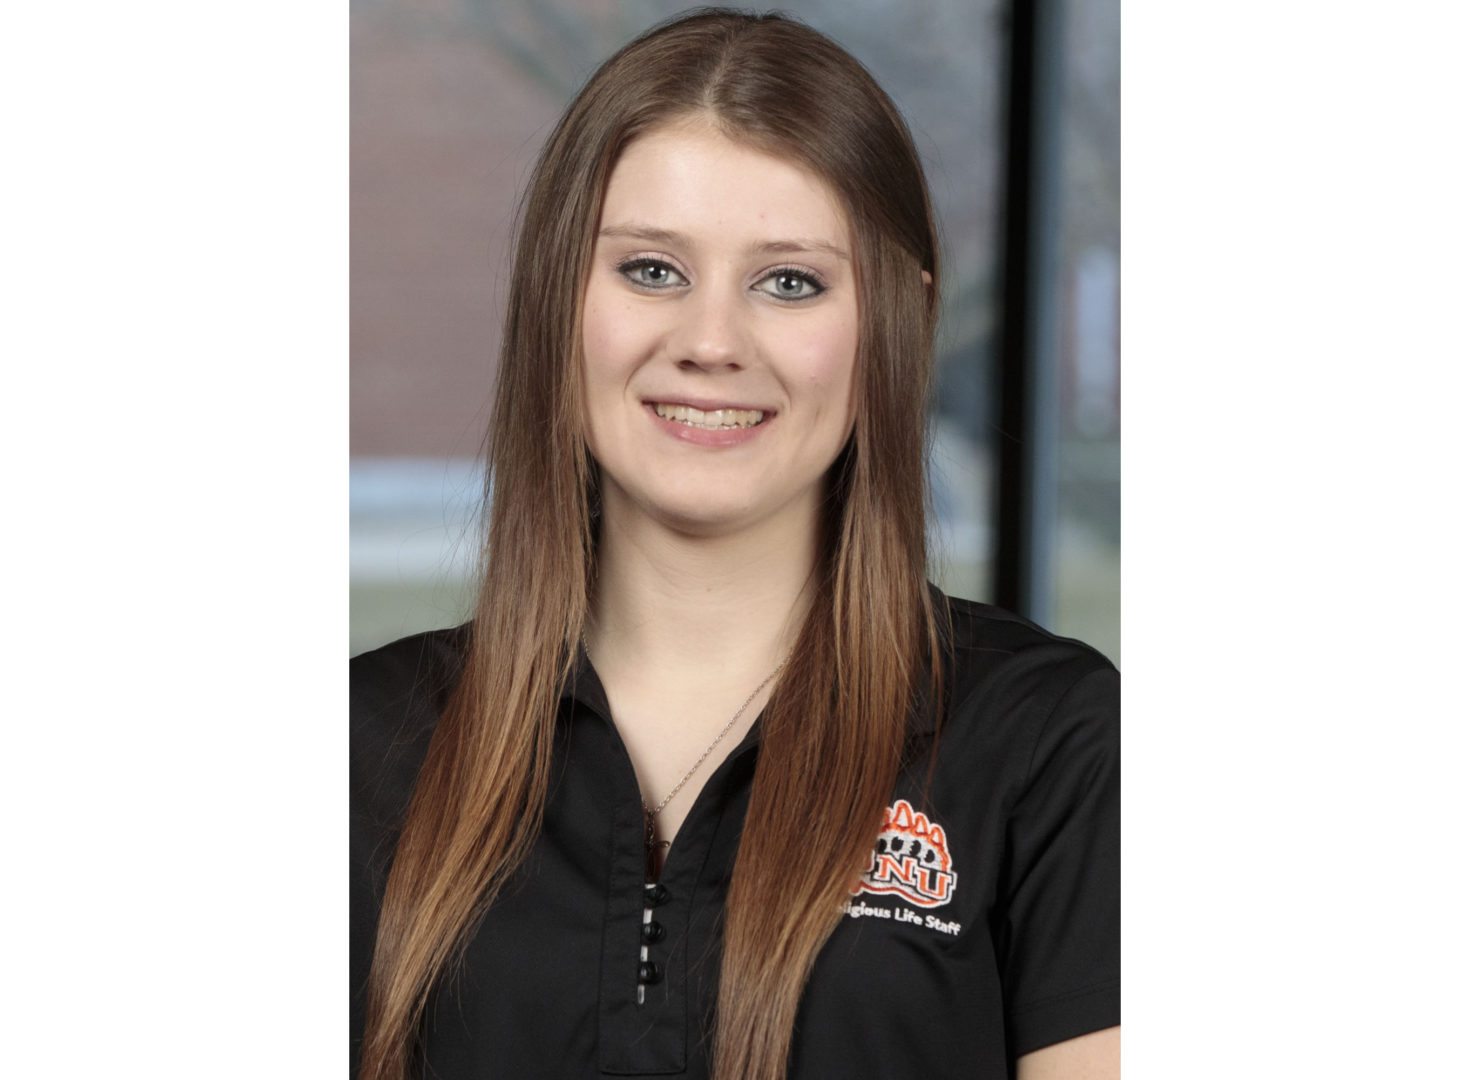 ONU Law Student Receives Catherine Freed Leadership, Service Award